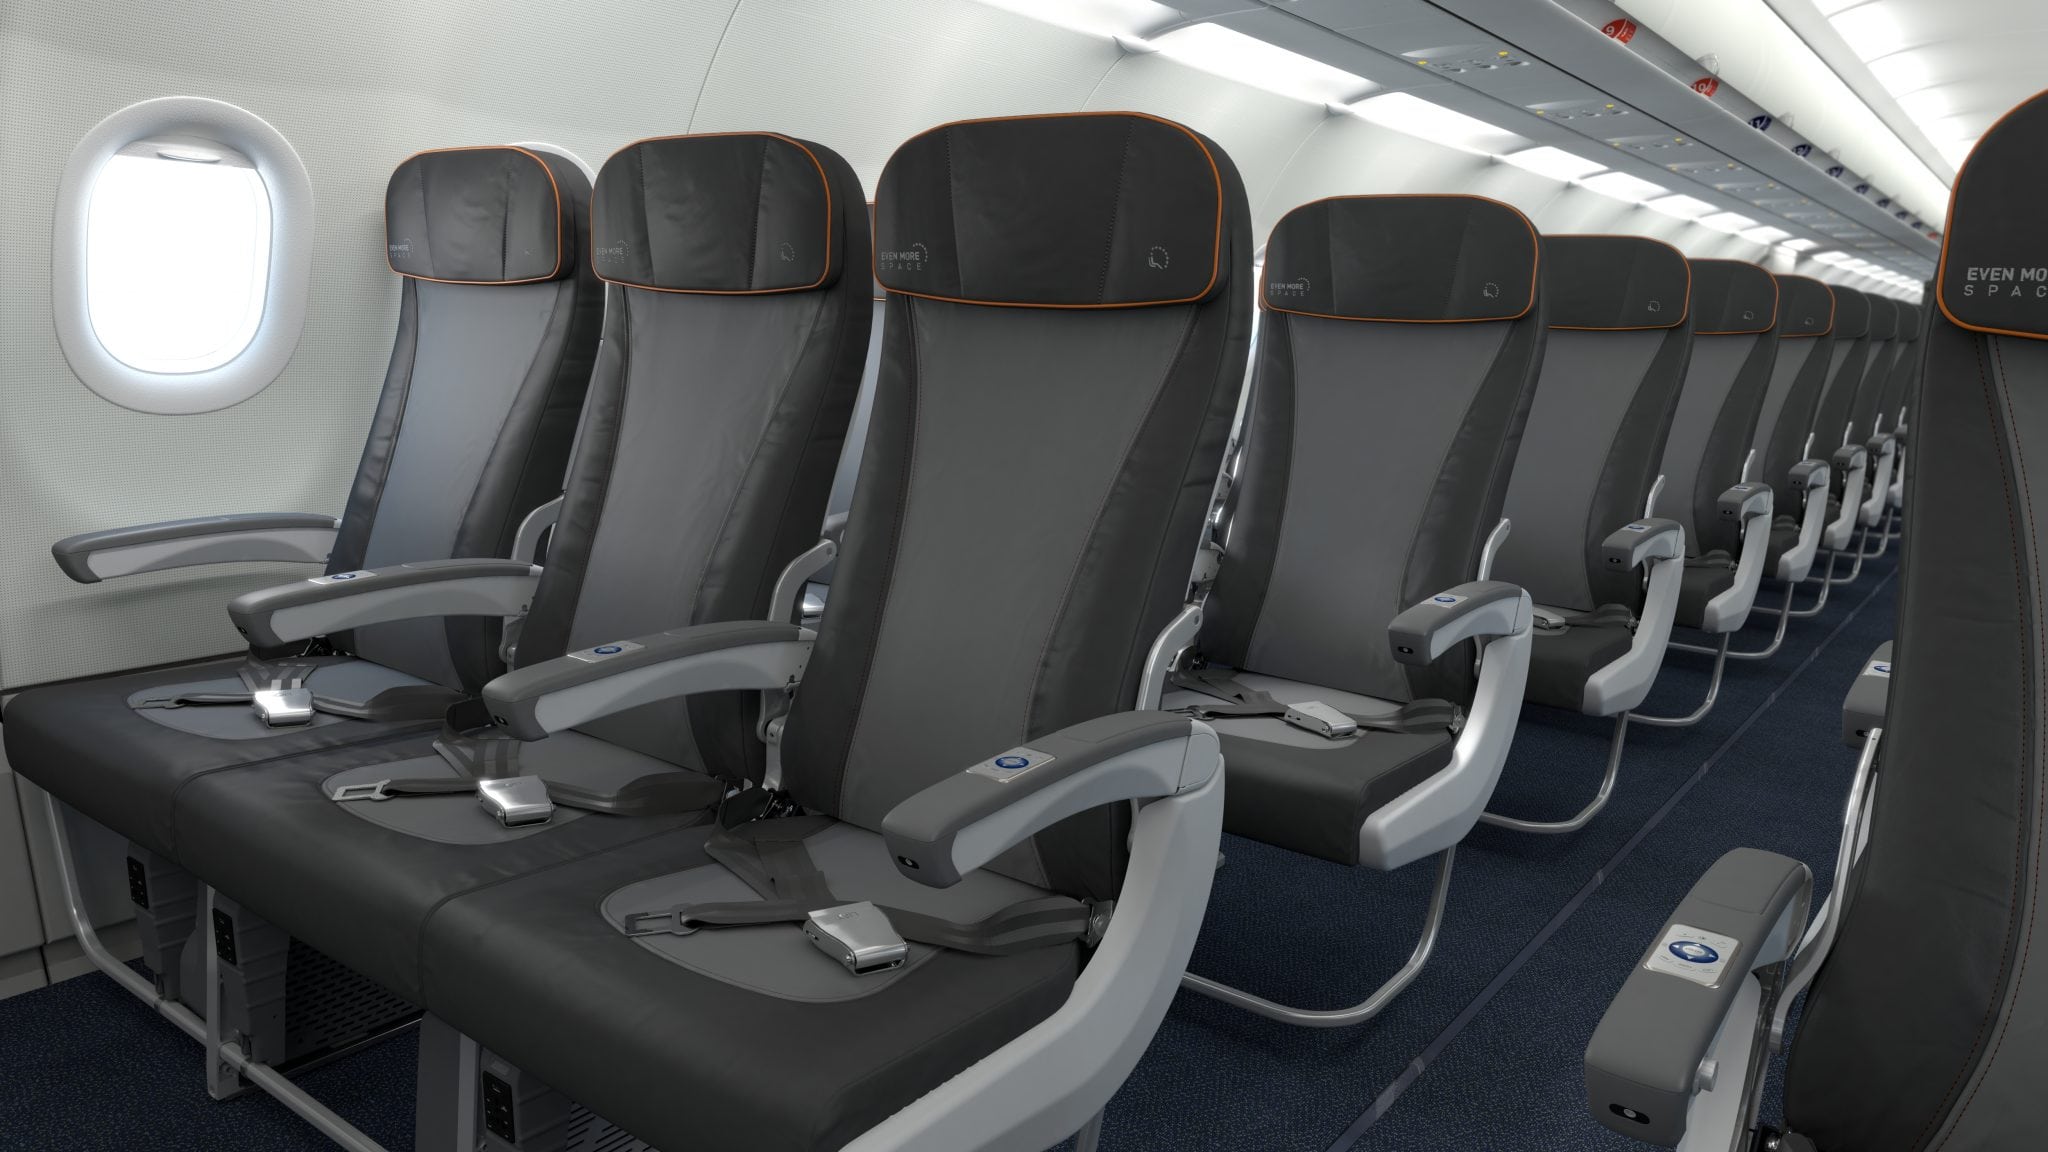 These are the seats in the front of the economy section of JetBlue's Airbus A321s. On a different JetBlue aircraft, the Airbus A320, the airline plans to add 15 extra seats beginning in the second half of 2016.